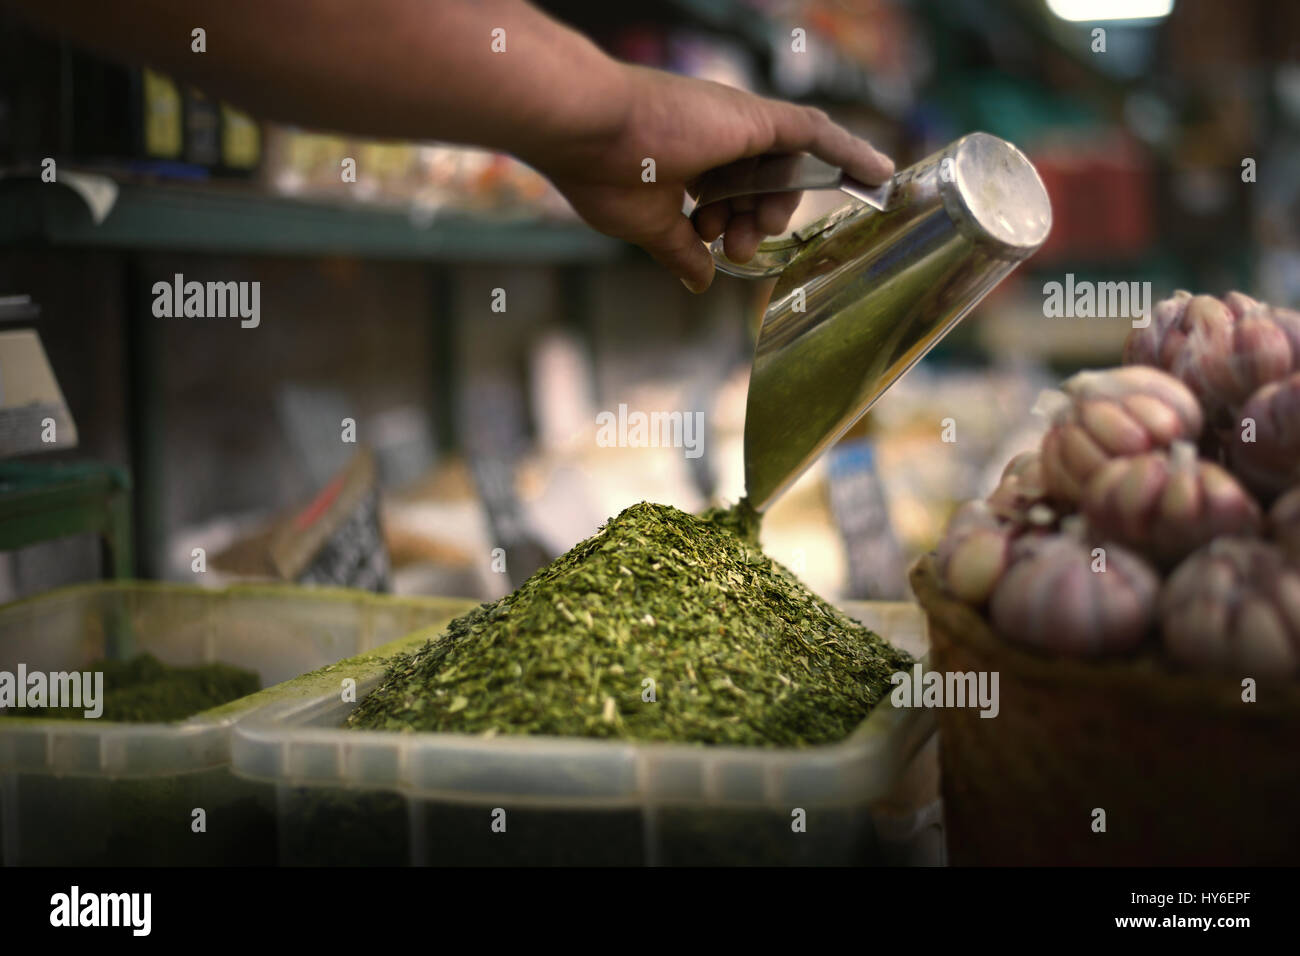 Owner of the market preparing mate for sale. Stock Photo